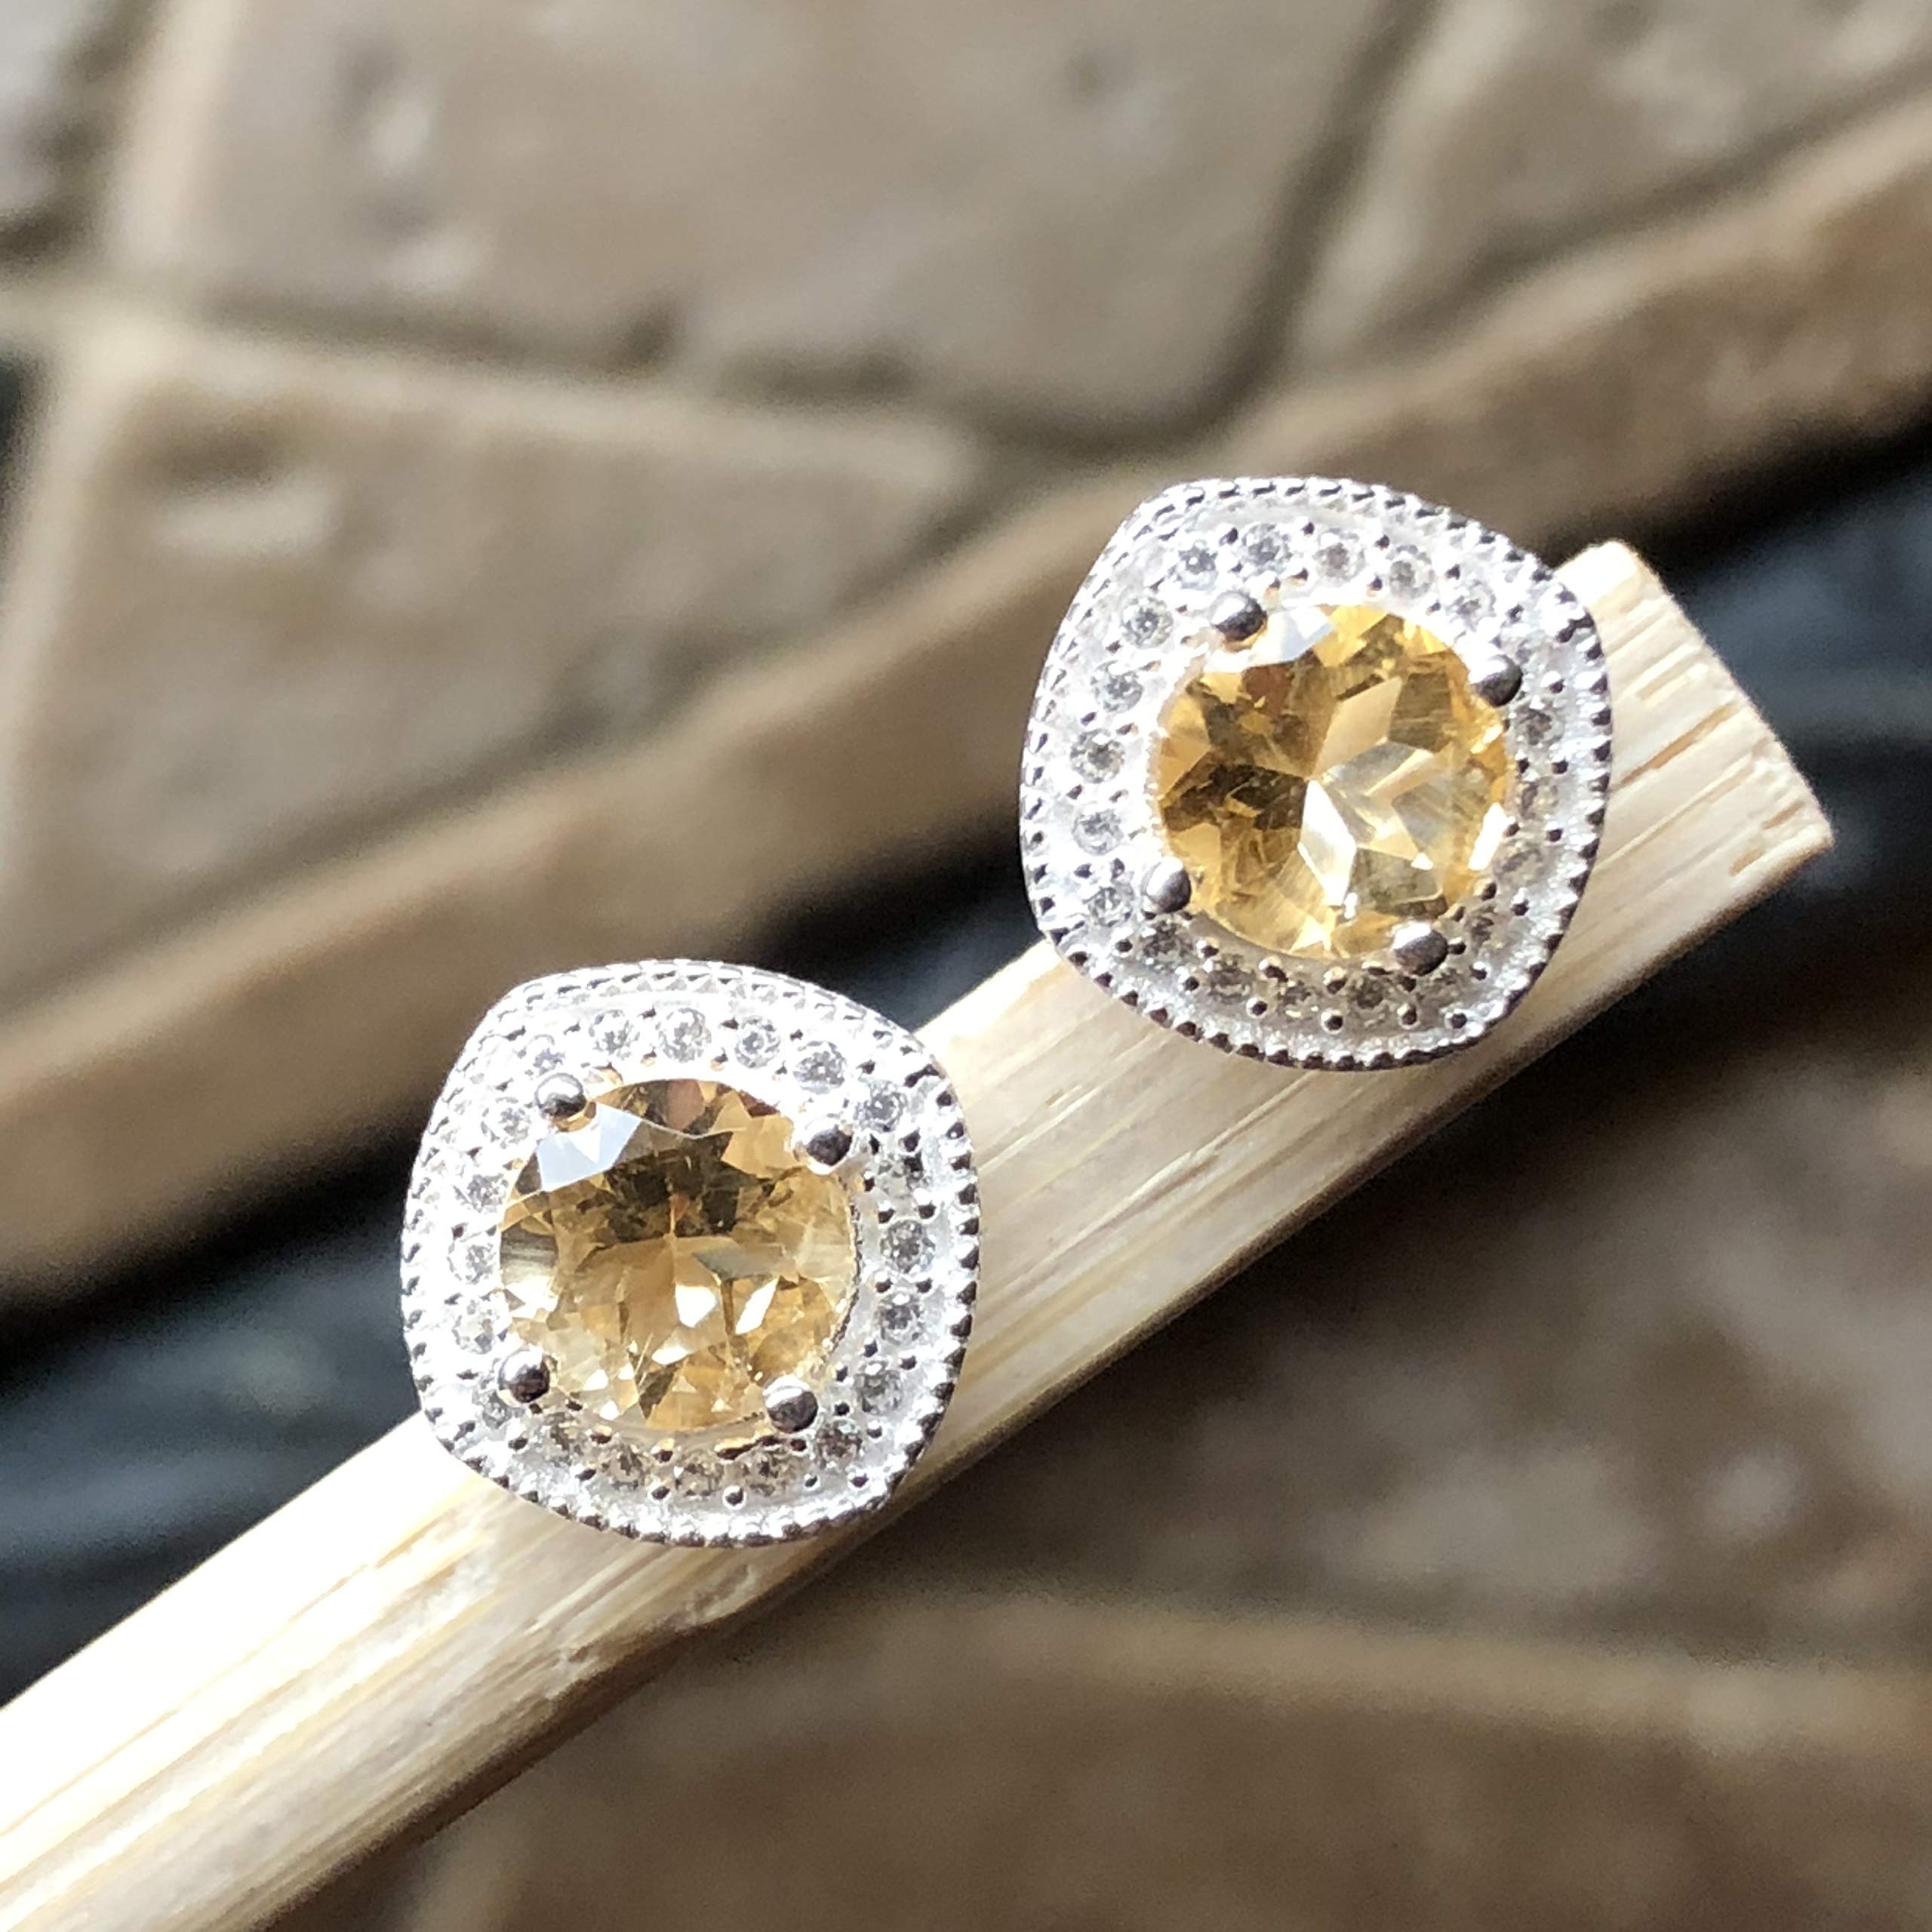 Natural 1.5ct Golden Citrine 925 Solid Sterling Silver Stud Earrings 10mm - Natural Rocks by Kala